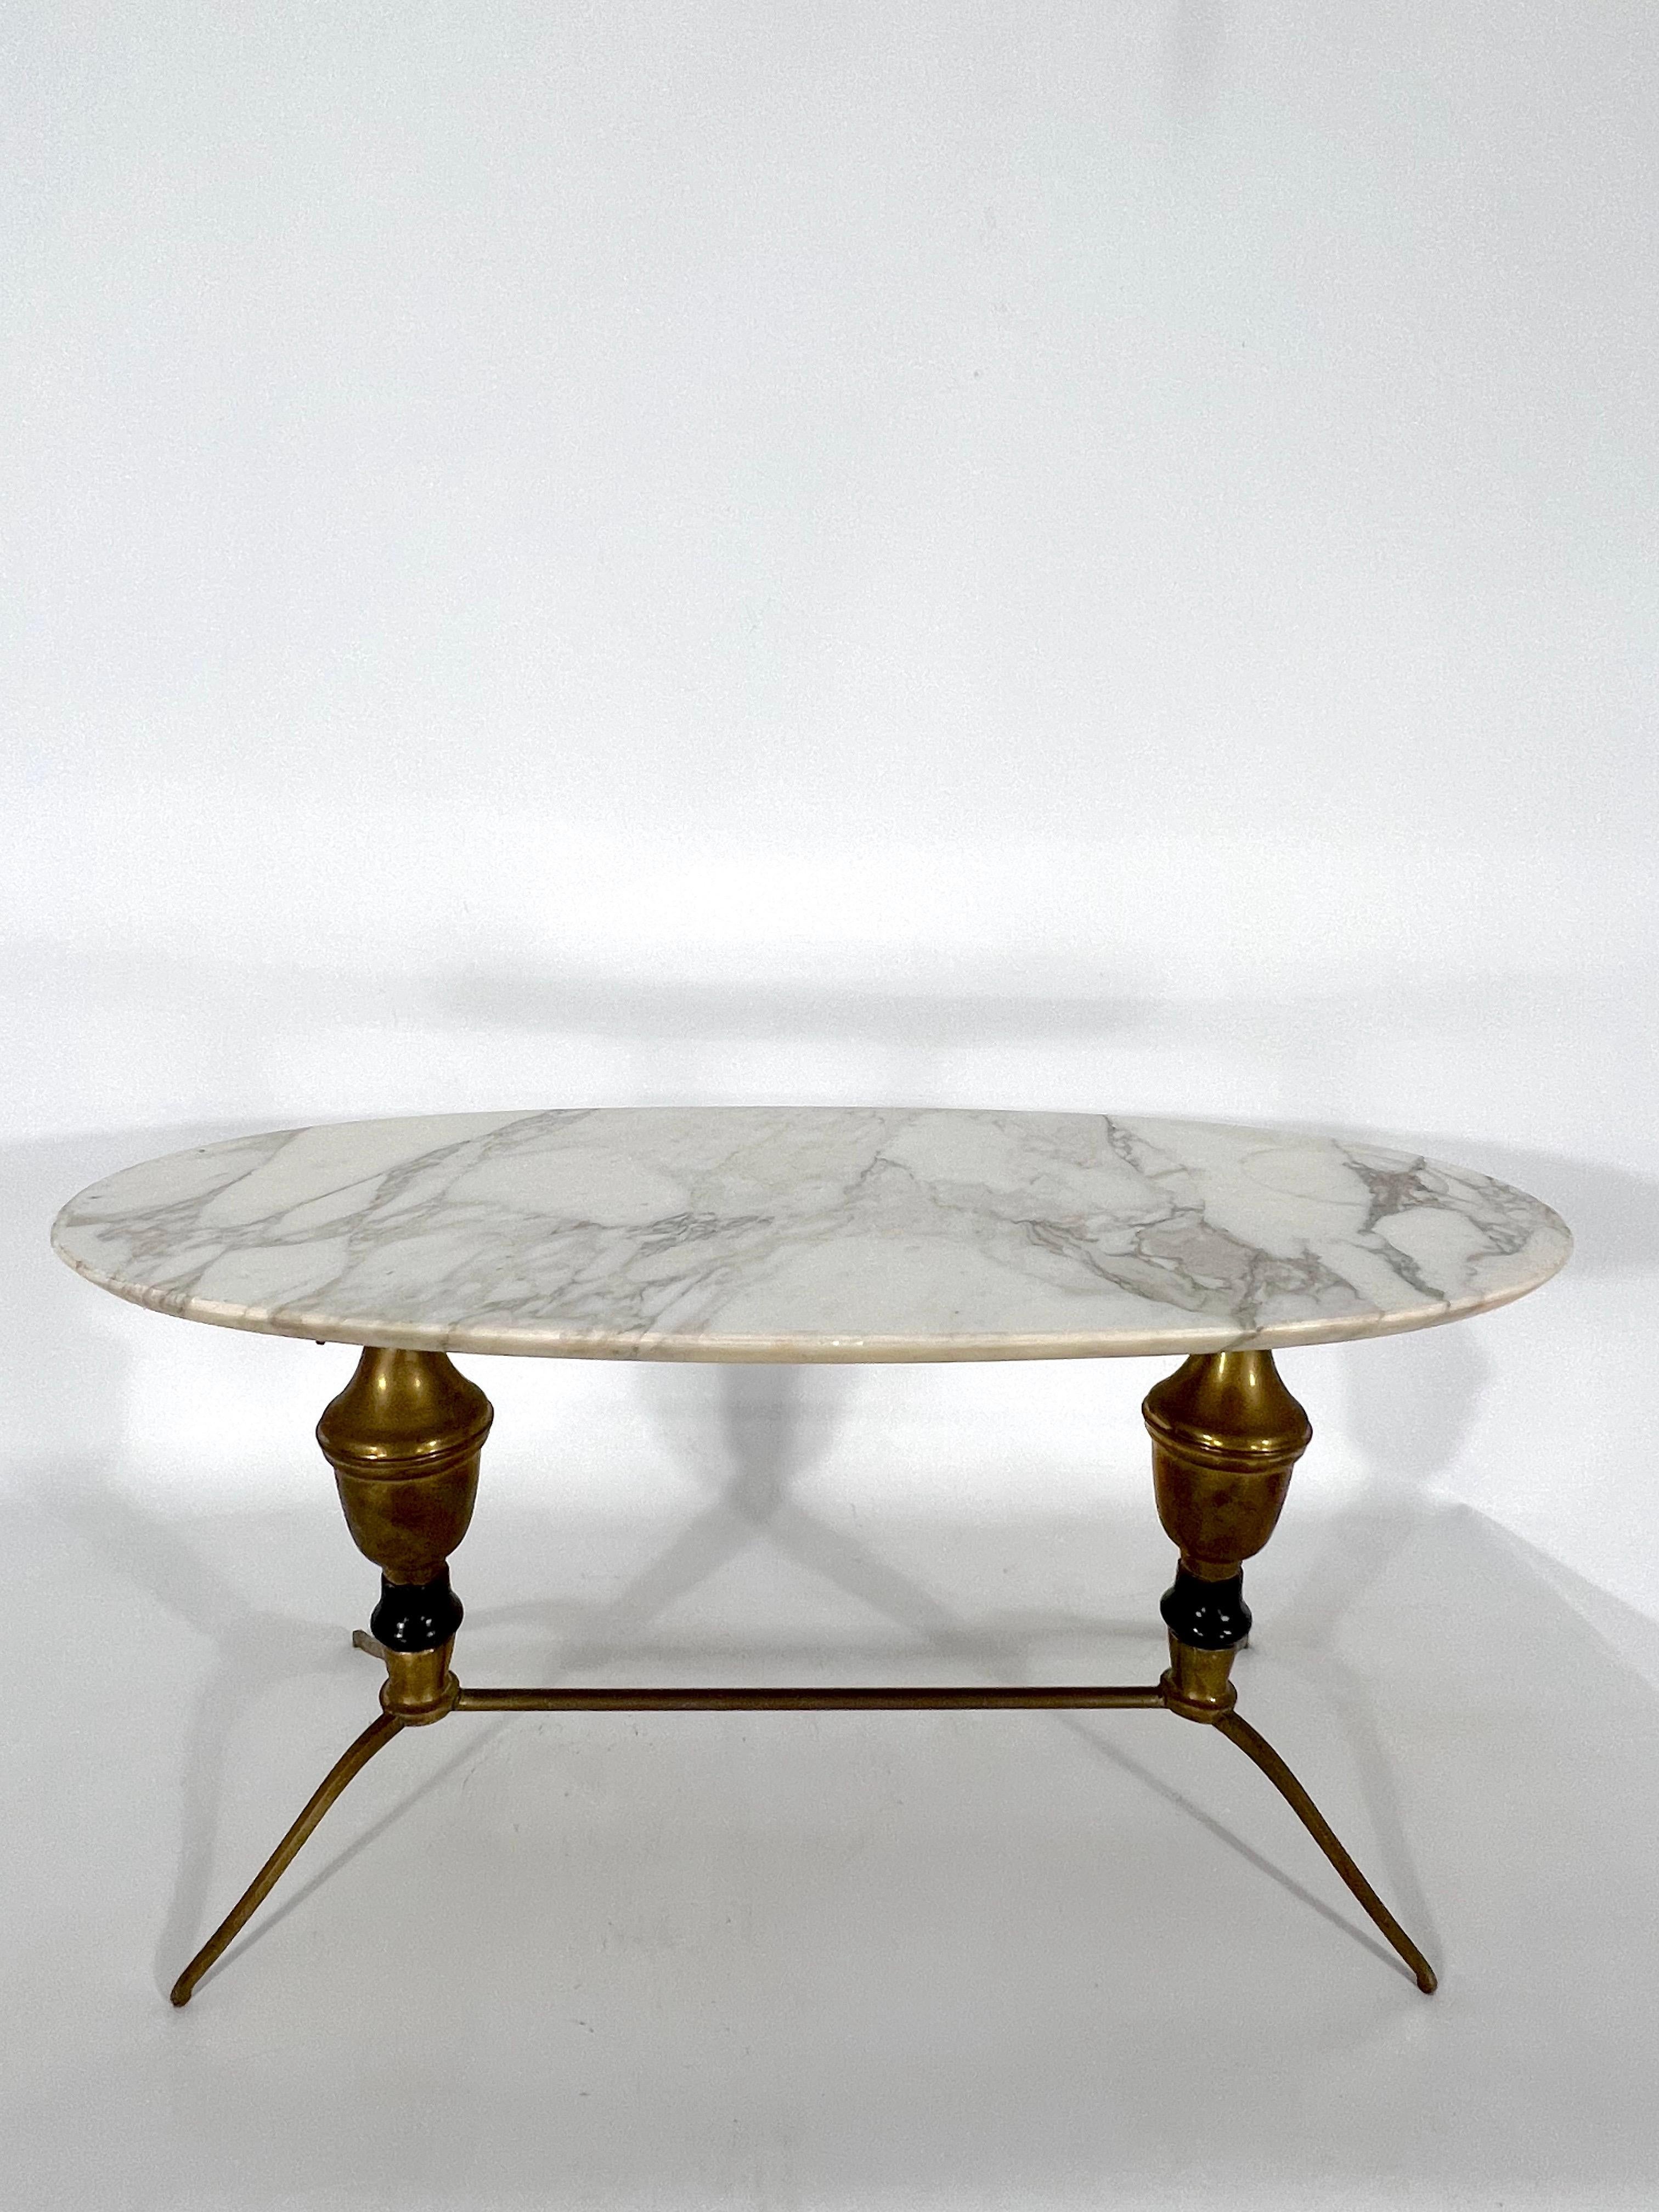 Vintage Brass and Marble Coffee Table, Italy 1950s For Sale 1